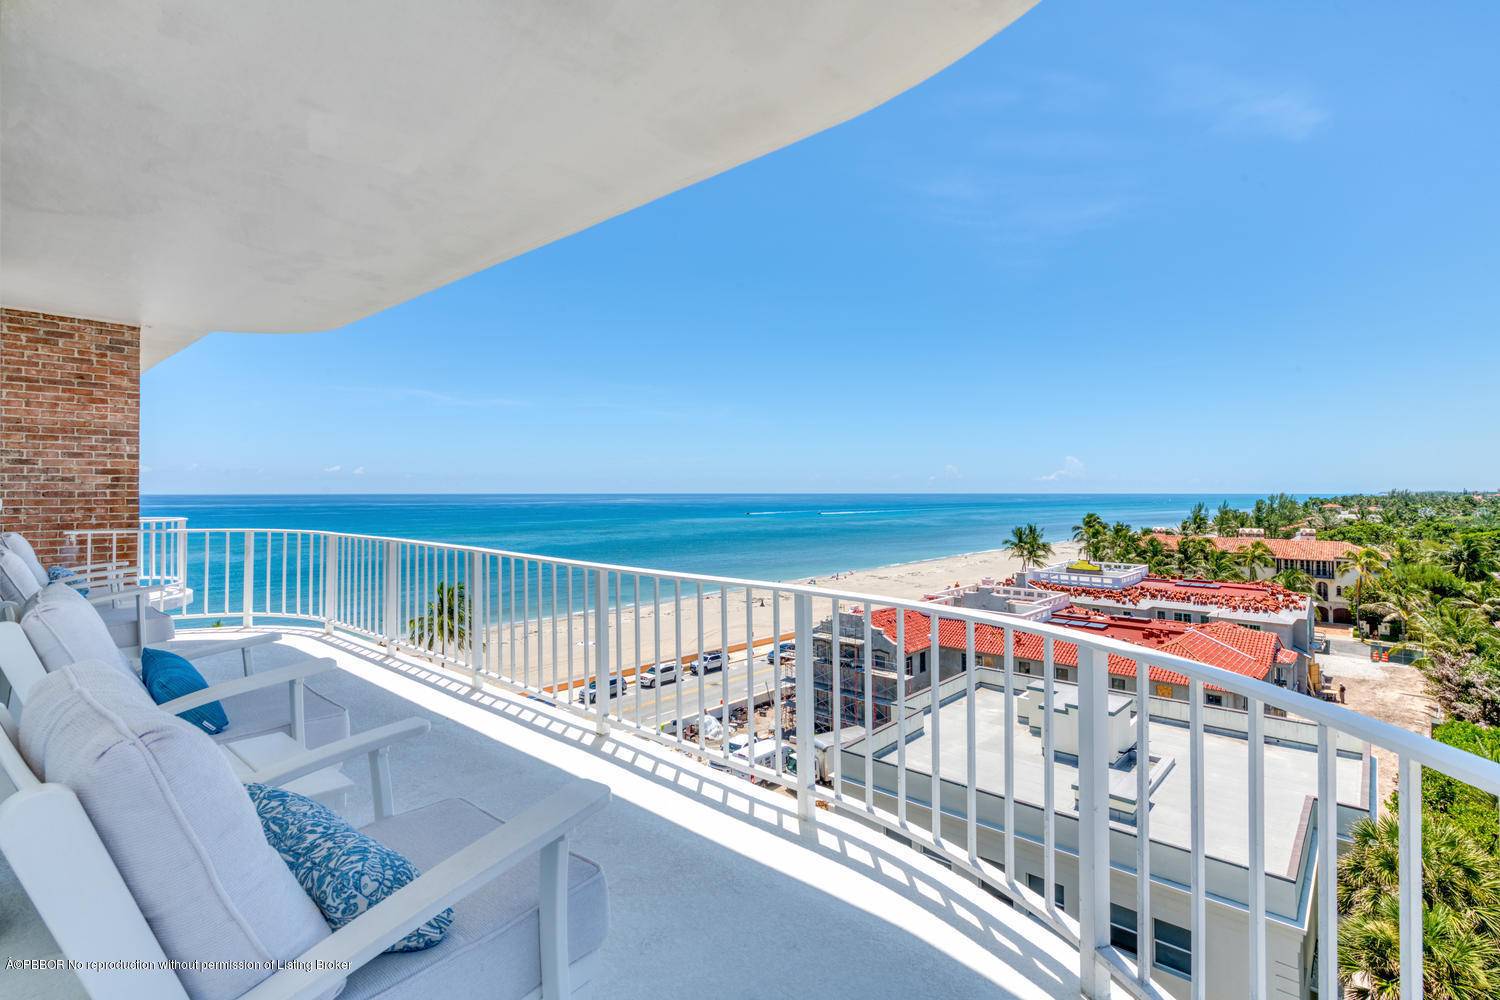 Enjoy the winter months in the warmth of Florida's climate along with the ocean views from all rooms of this 2 2 condo.